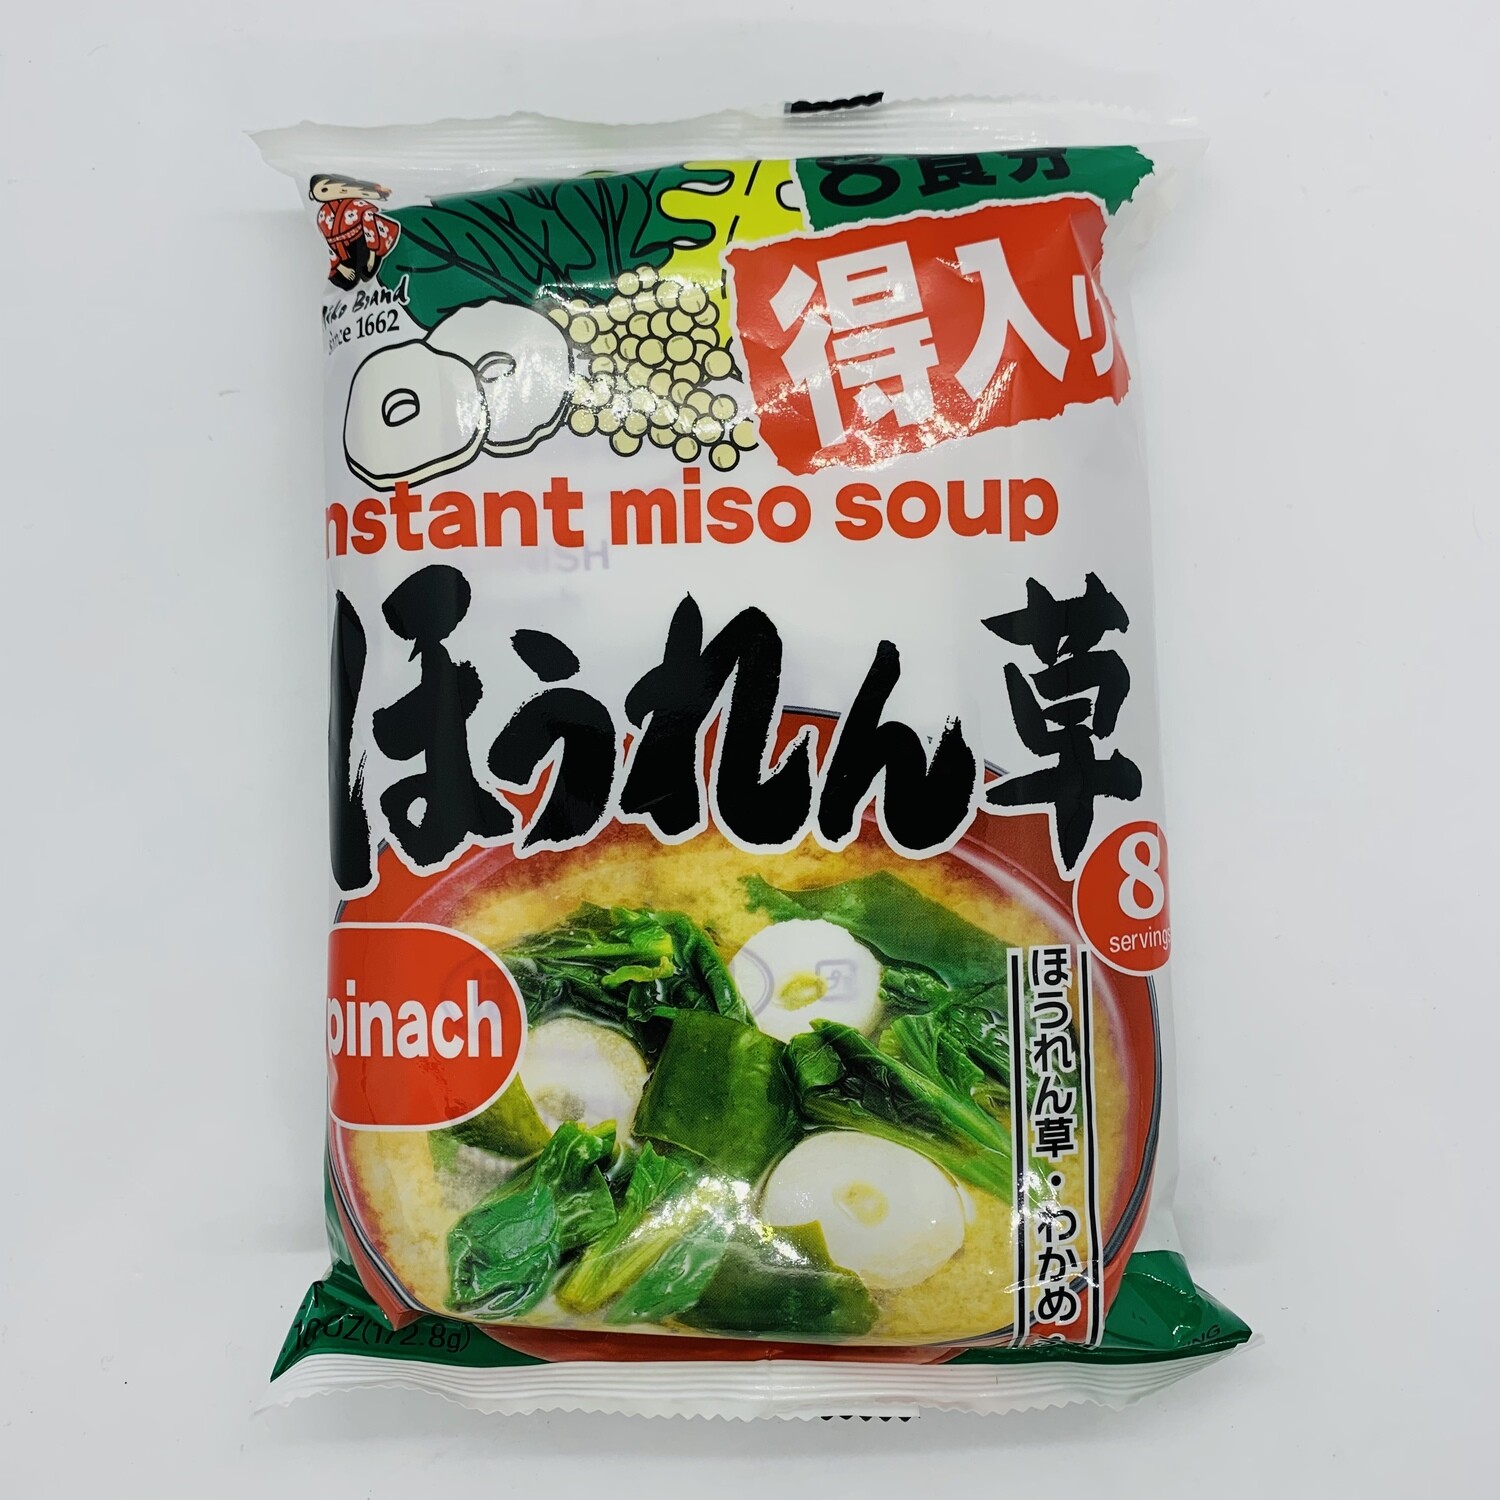 SHINSHU Instant Miso Soup Spinach